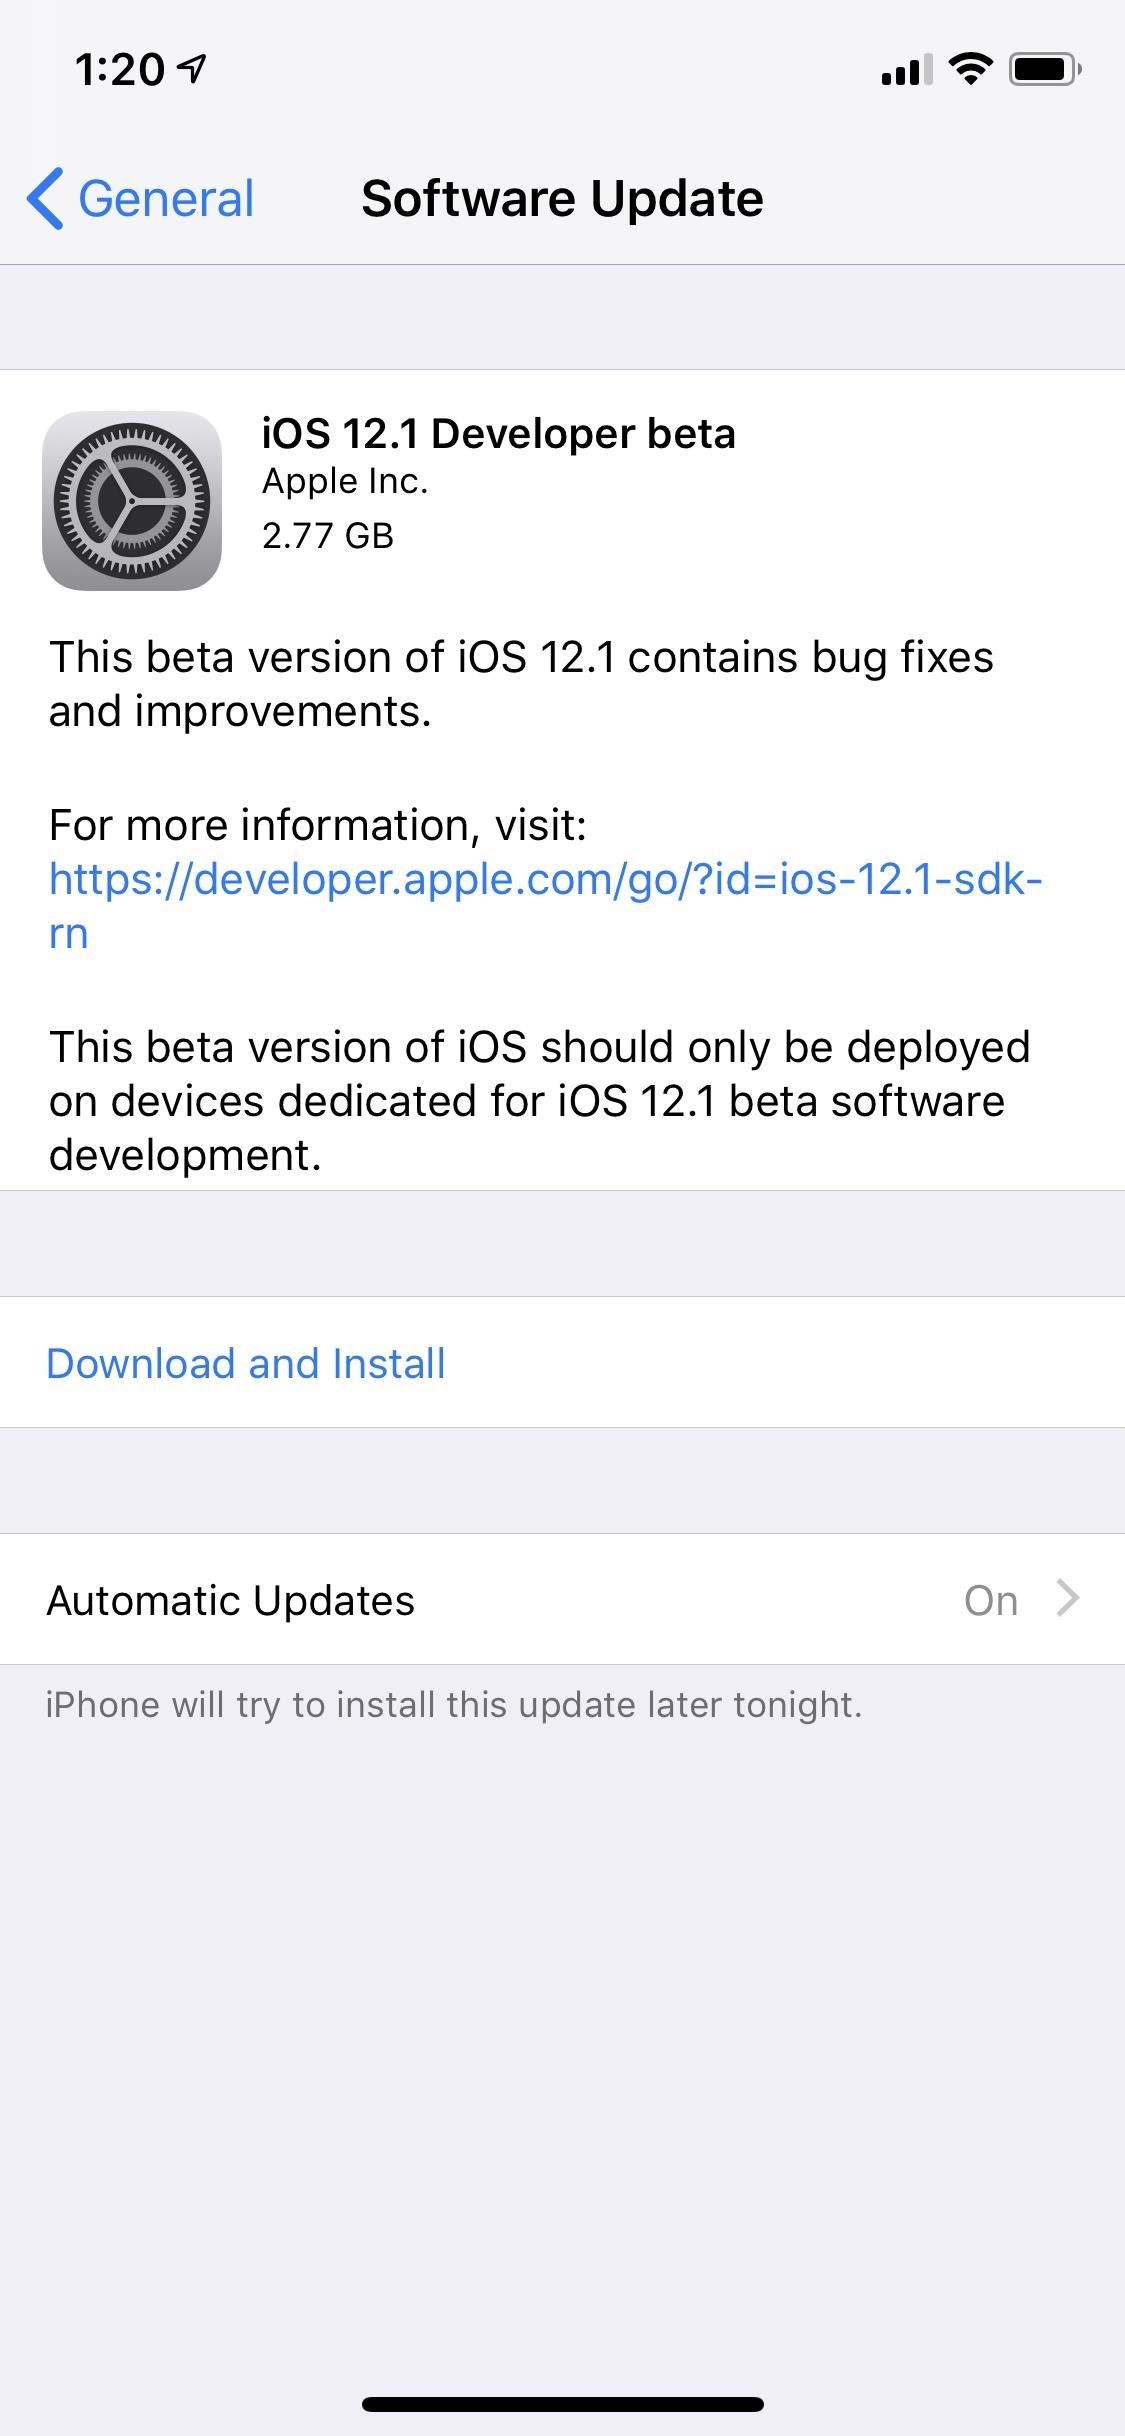 Apple Releases First iOS 12.1 Beta to Software Developers, Brings Back Group FaceTime